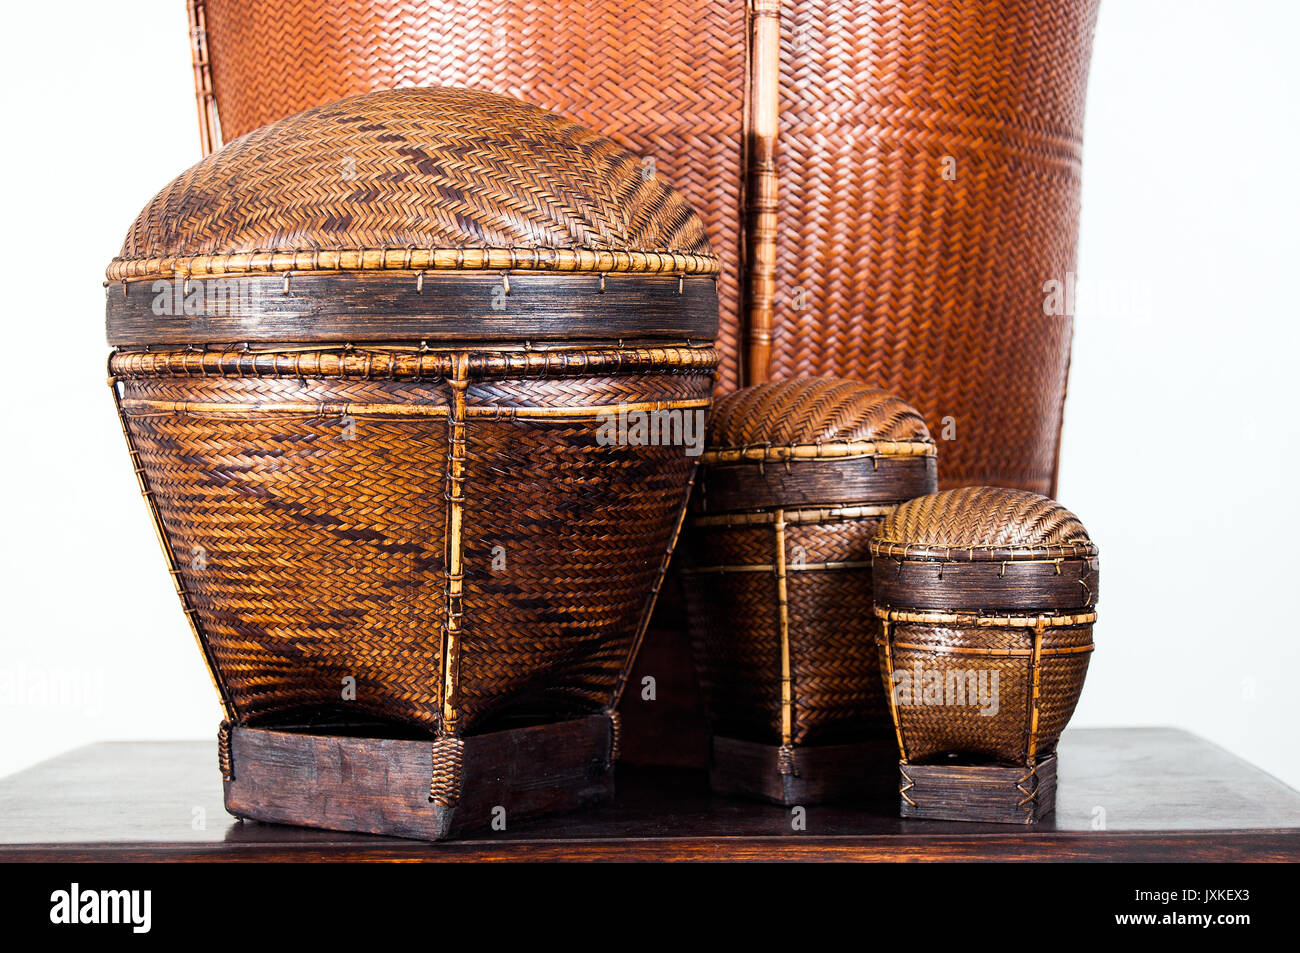 Tingkop tribal basketry from Palawan, Philippines, in an interior setting Stock Photo